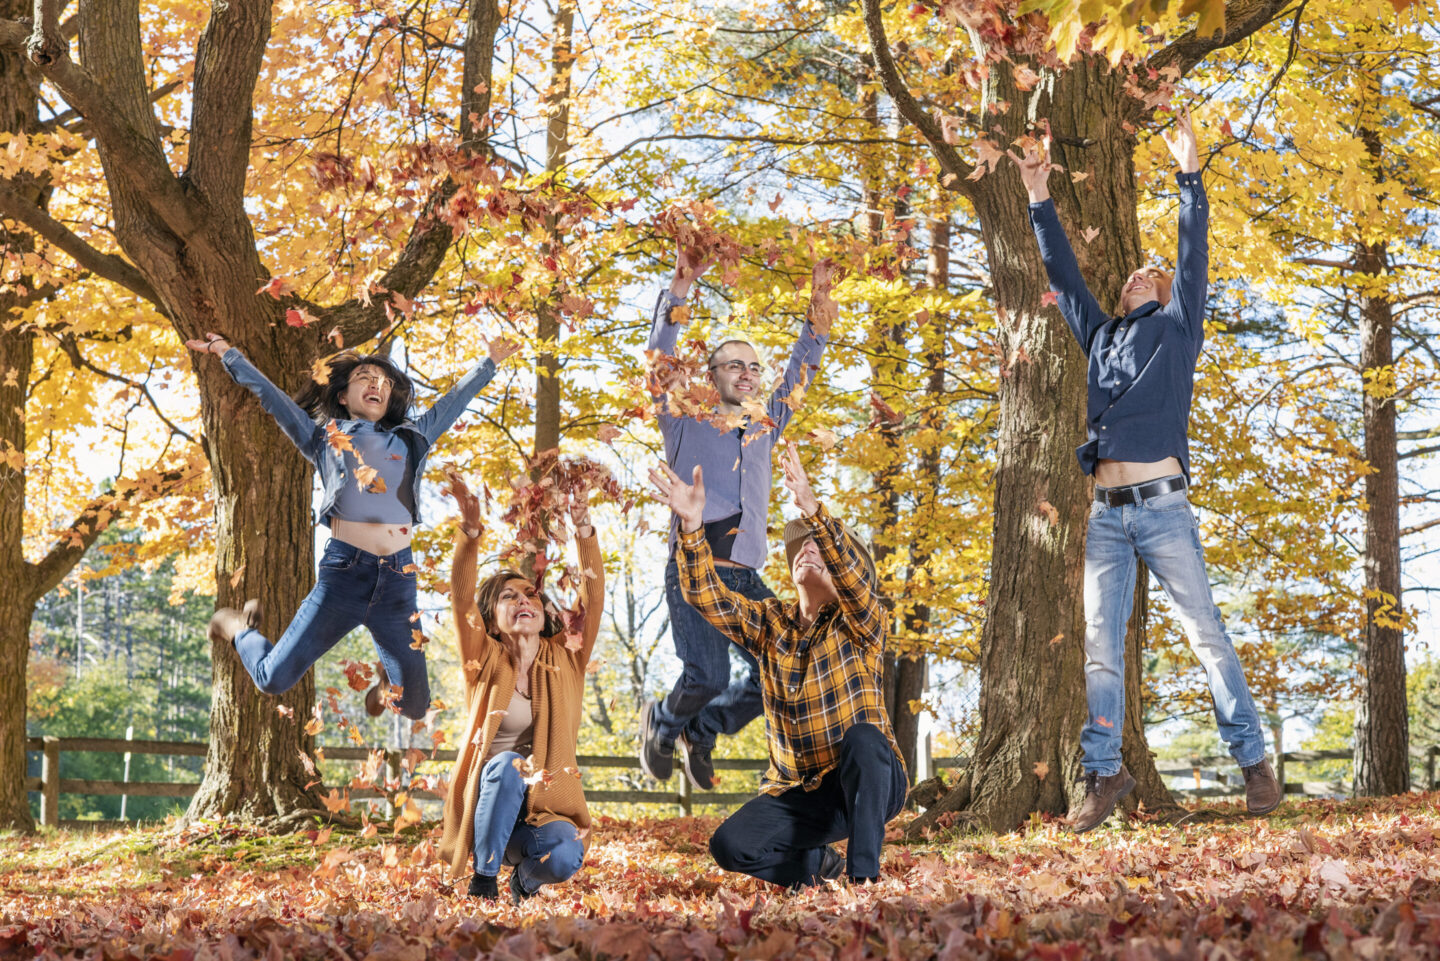 A group of people playing in fall leaves